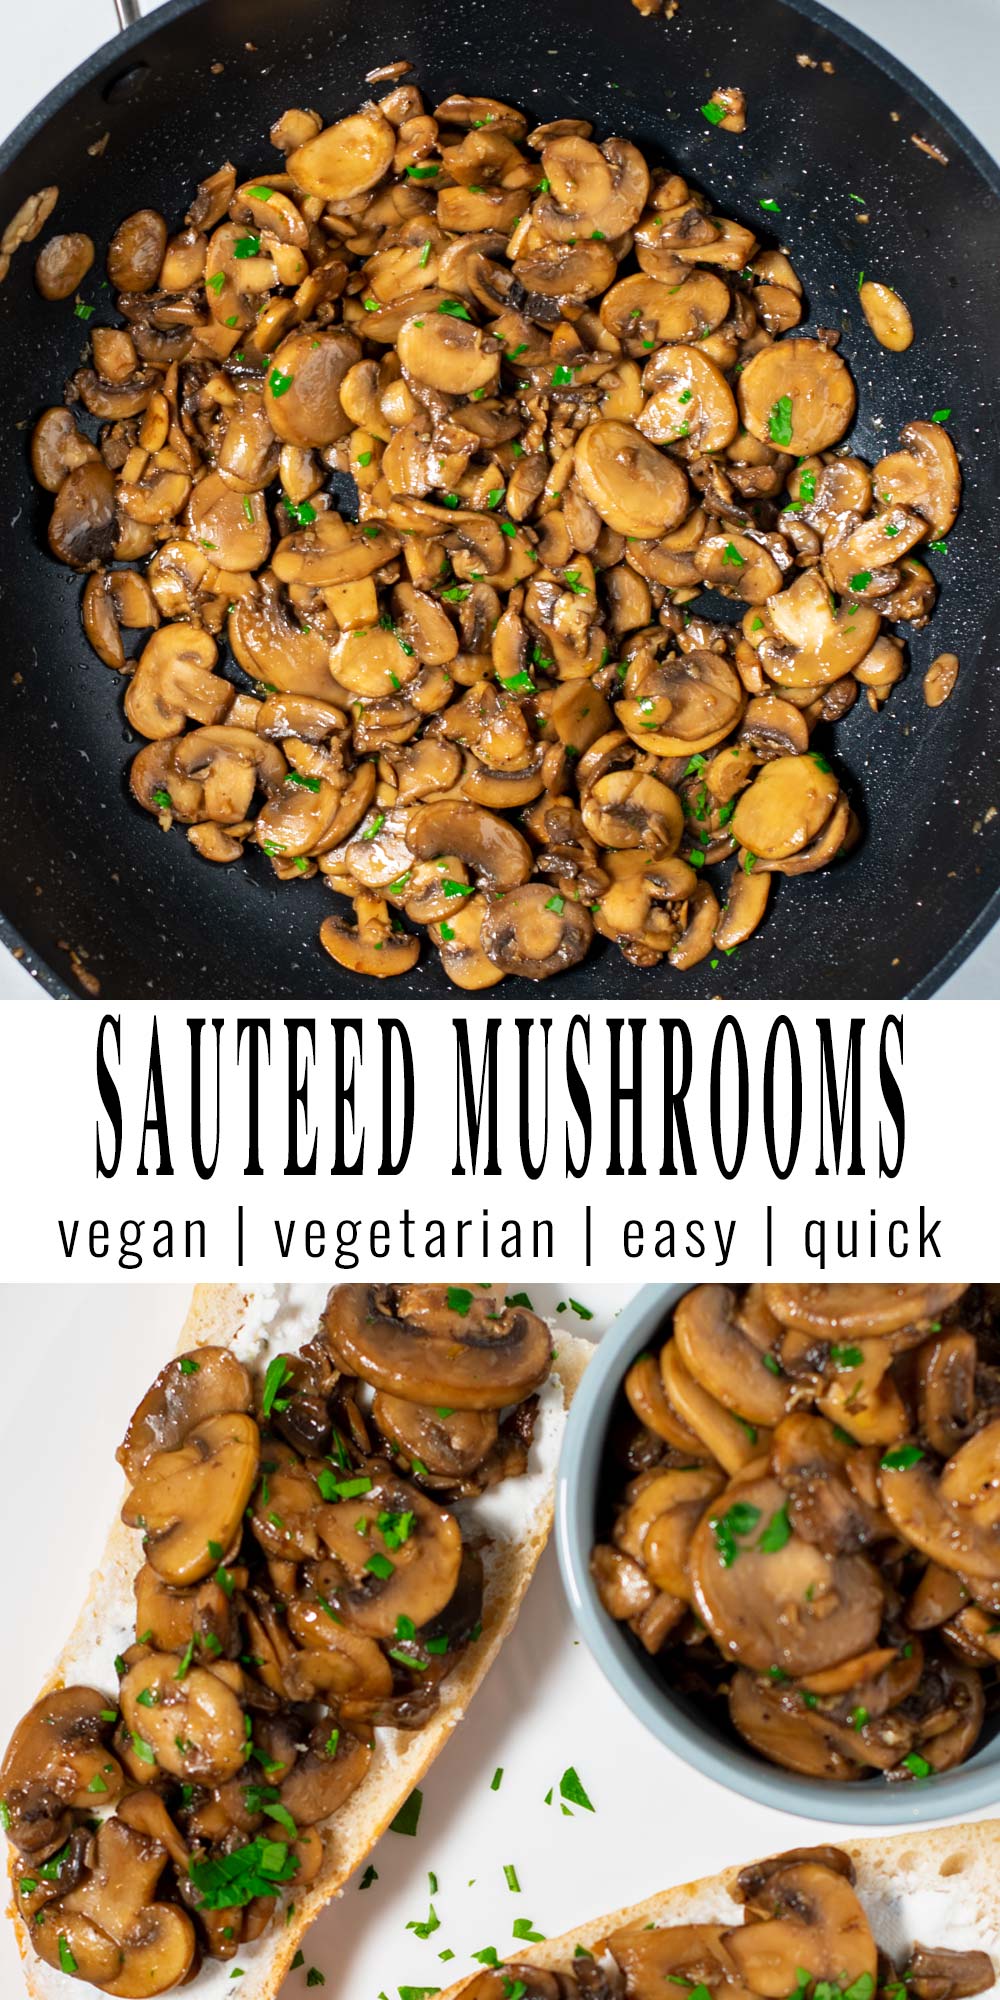 Collage of two pictures of the Sautéed Mushrooms with recipe title text.